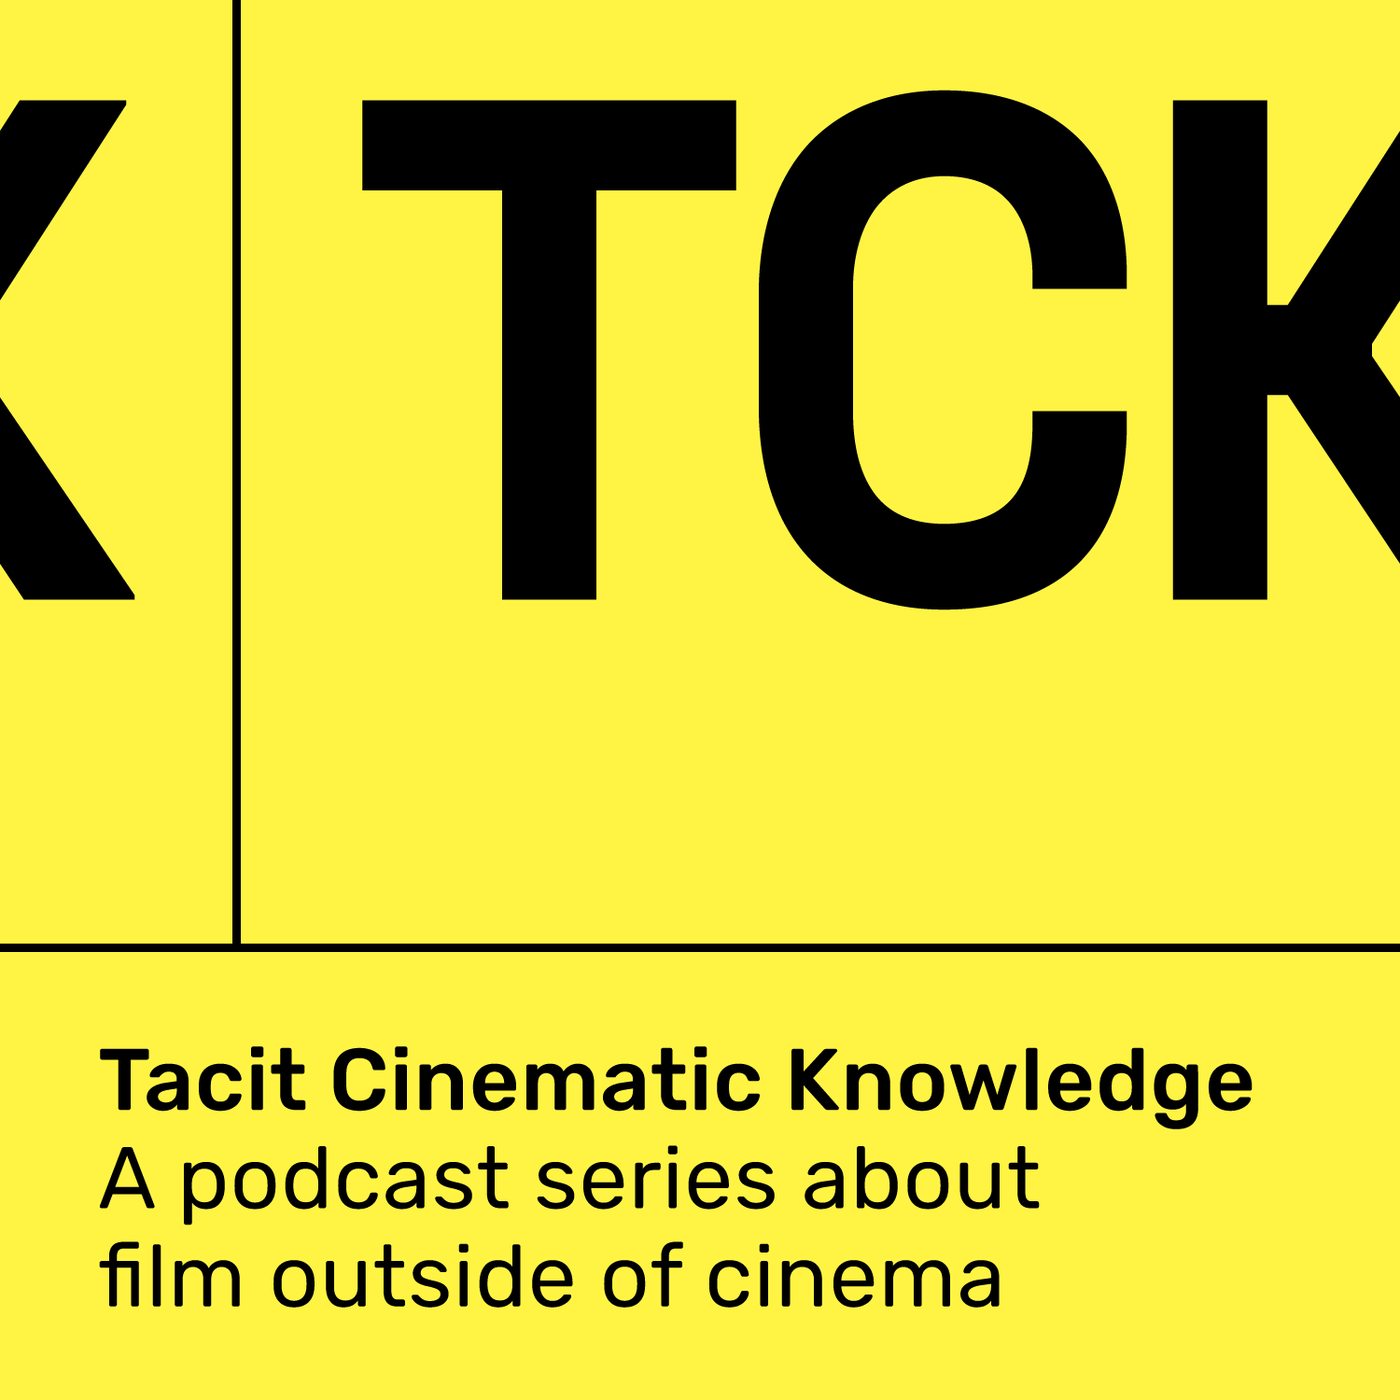 TCK. A podcast series about film outside of cinema